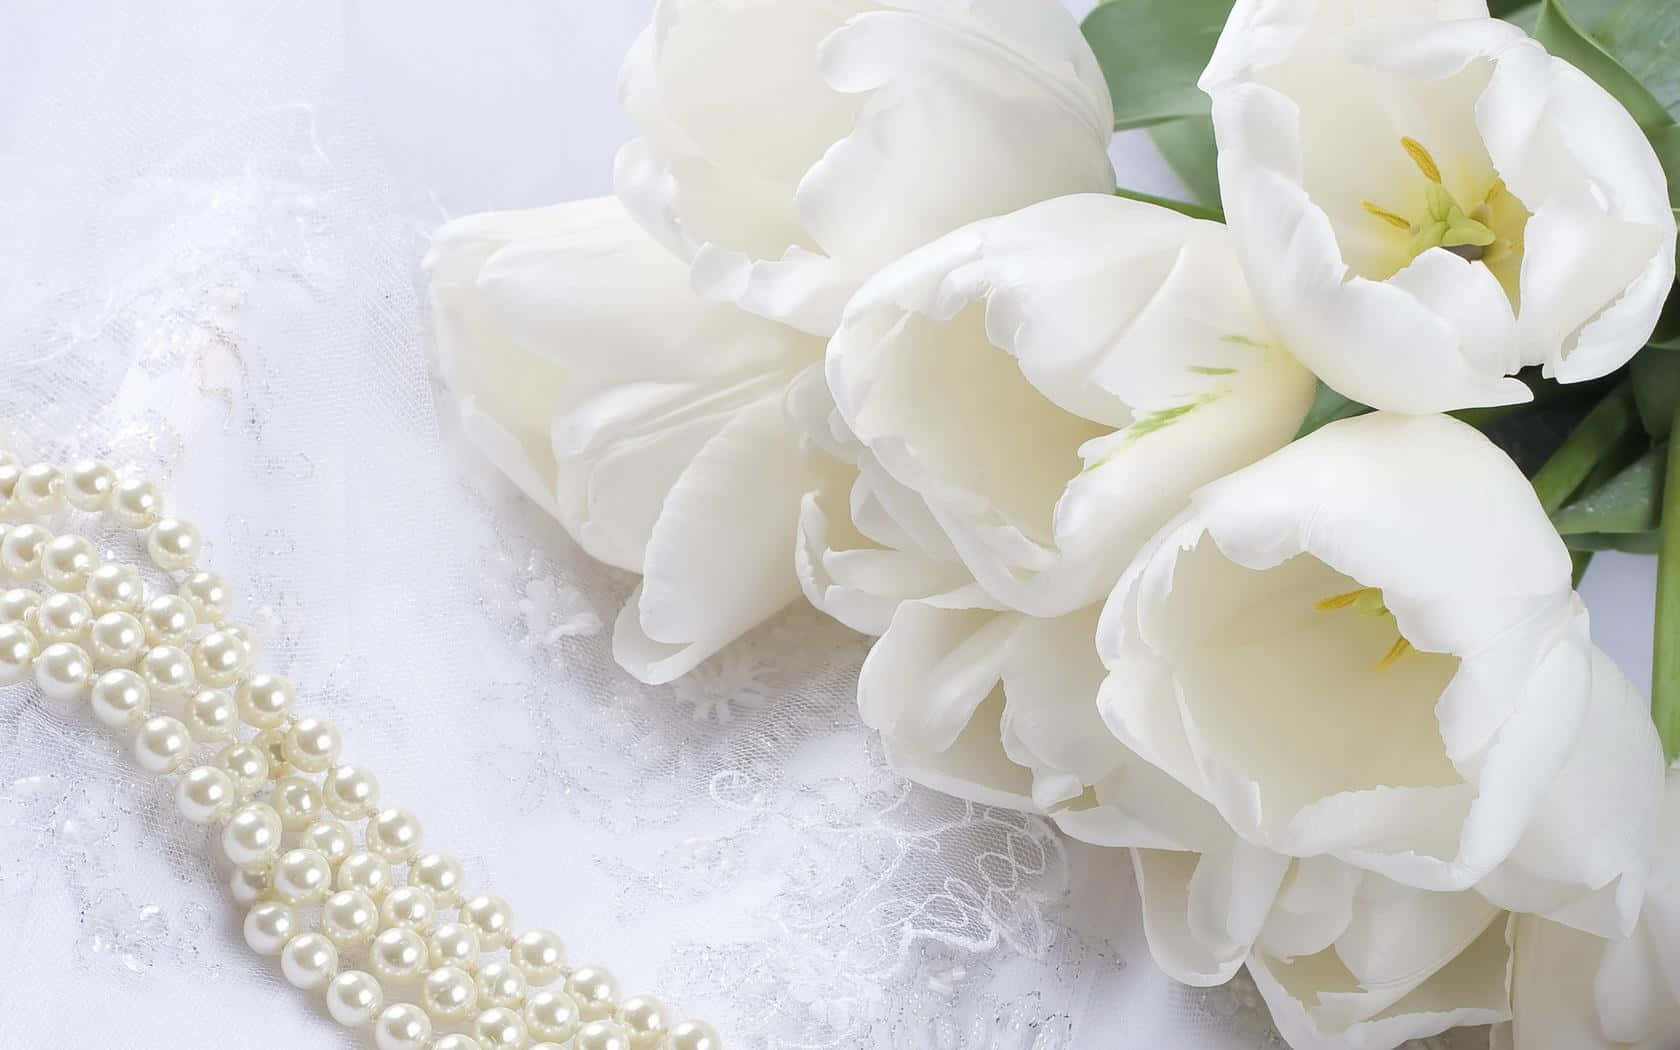 White Tulips And Pearls On A White Table